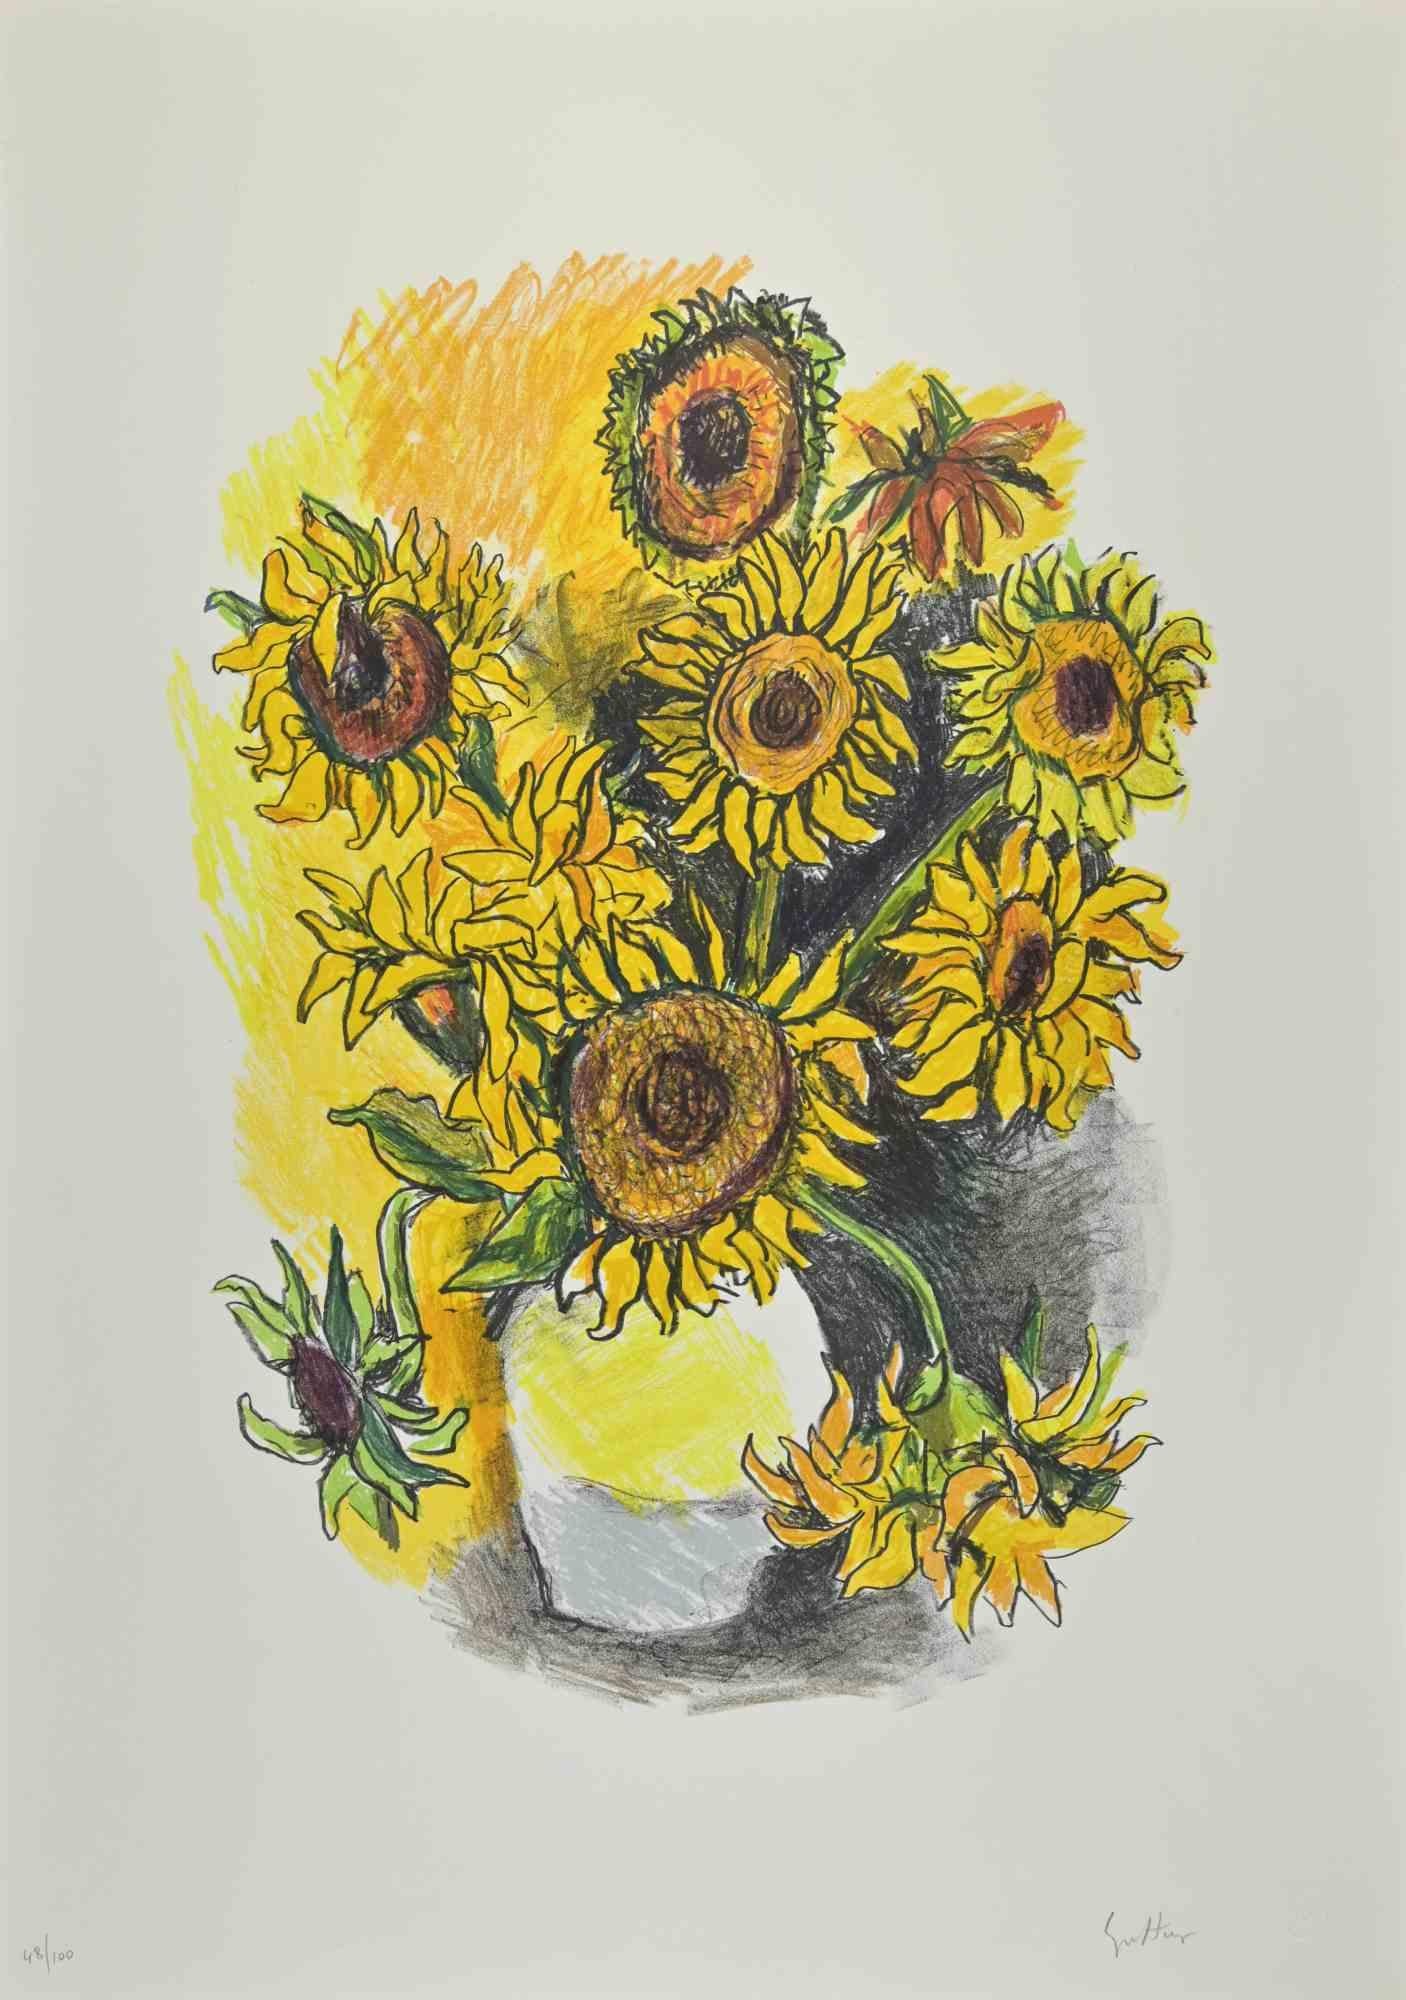 Hommage to Vincent Van Gogh is a lithograph realized by Renato Guttuso in 1980.

Hand-signed on the lower.

Numbered, edition of 100.

Drystamp "La Spirale".